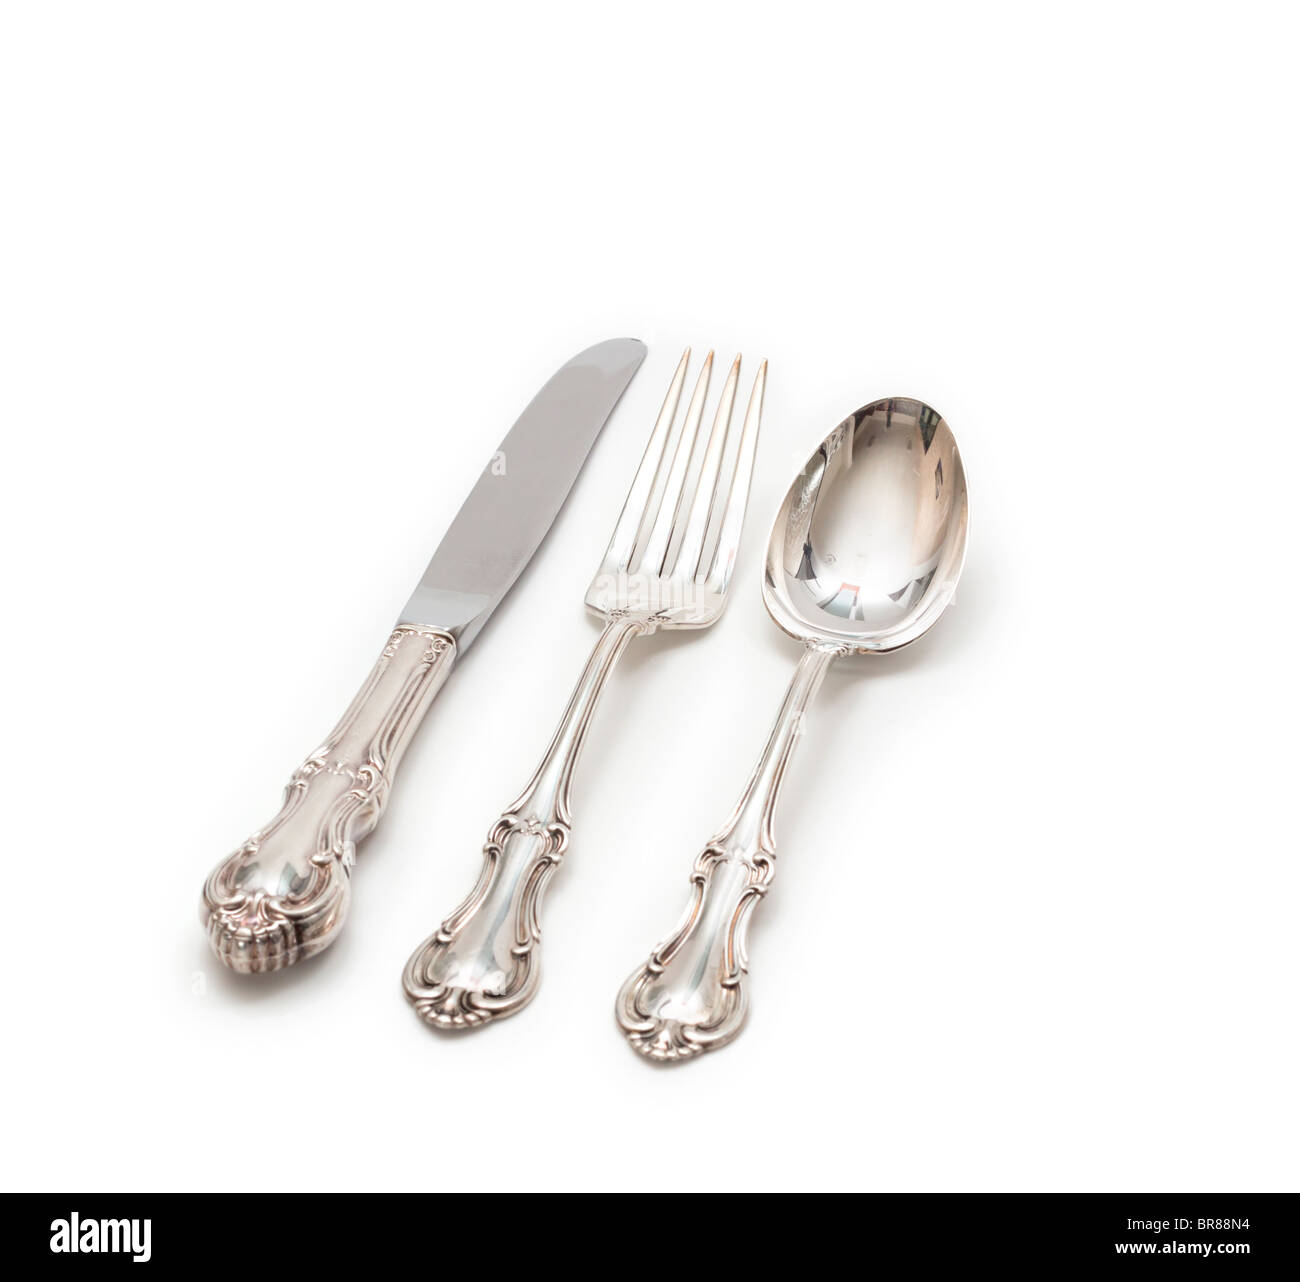 Knife, fork, and spoon Stock Photo